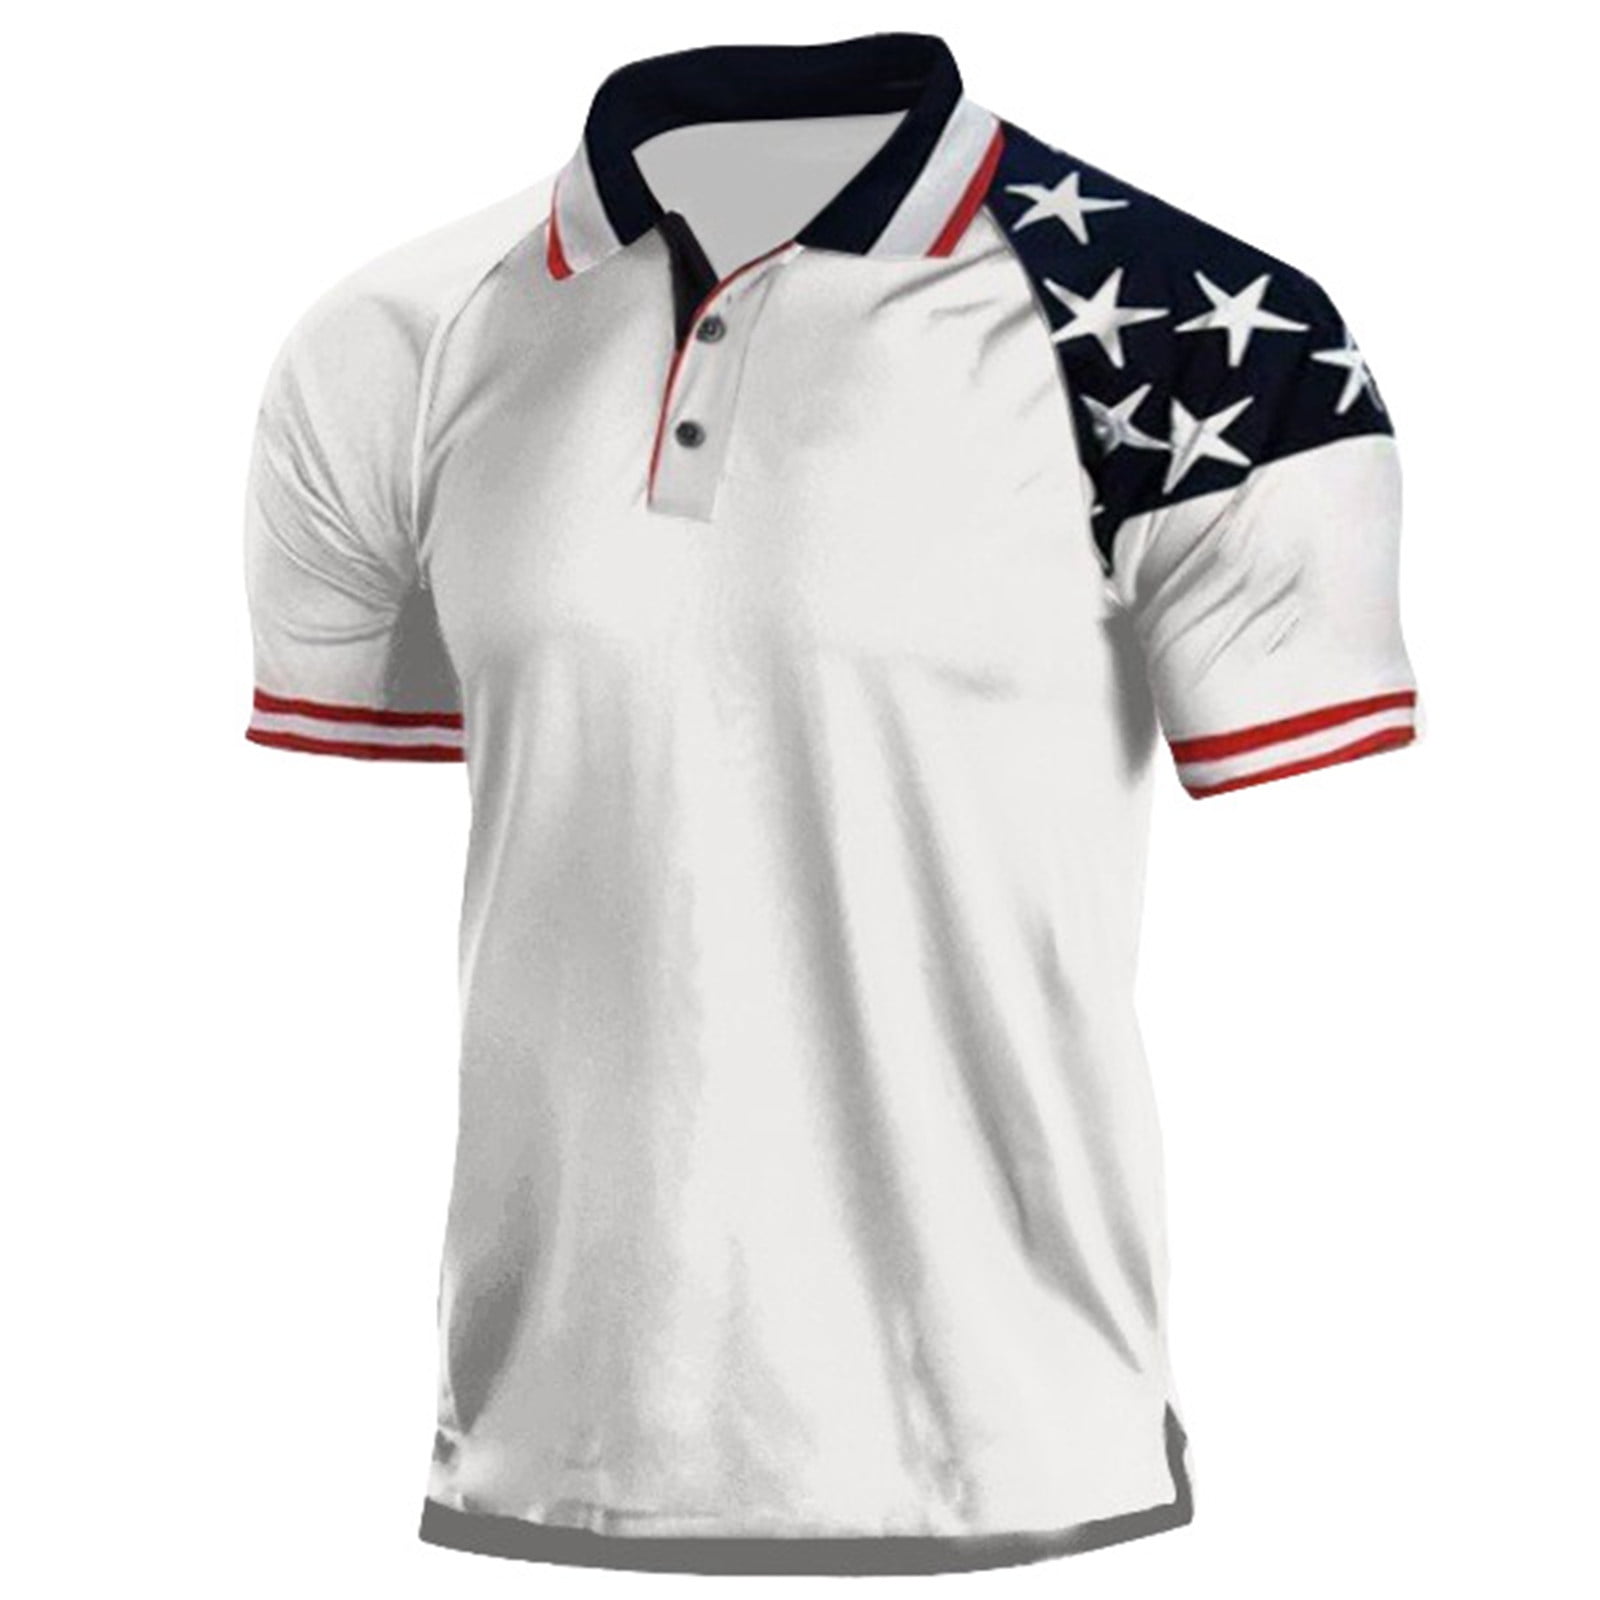 Caqnni Men's Polo Shirts with American Flag Prints Short Sleeve Polo ...